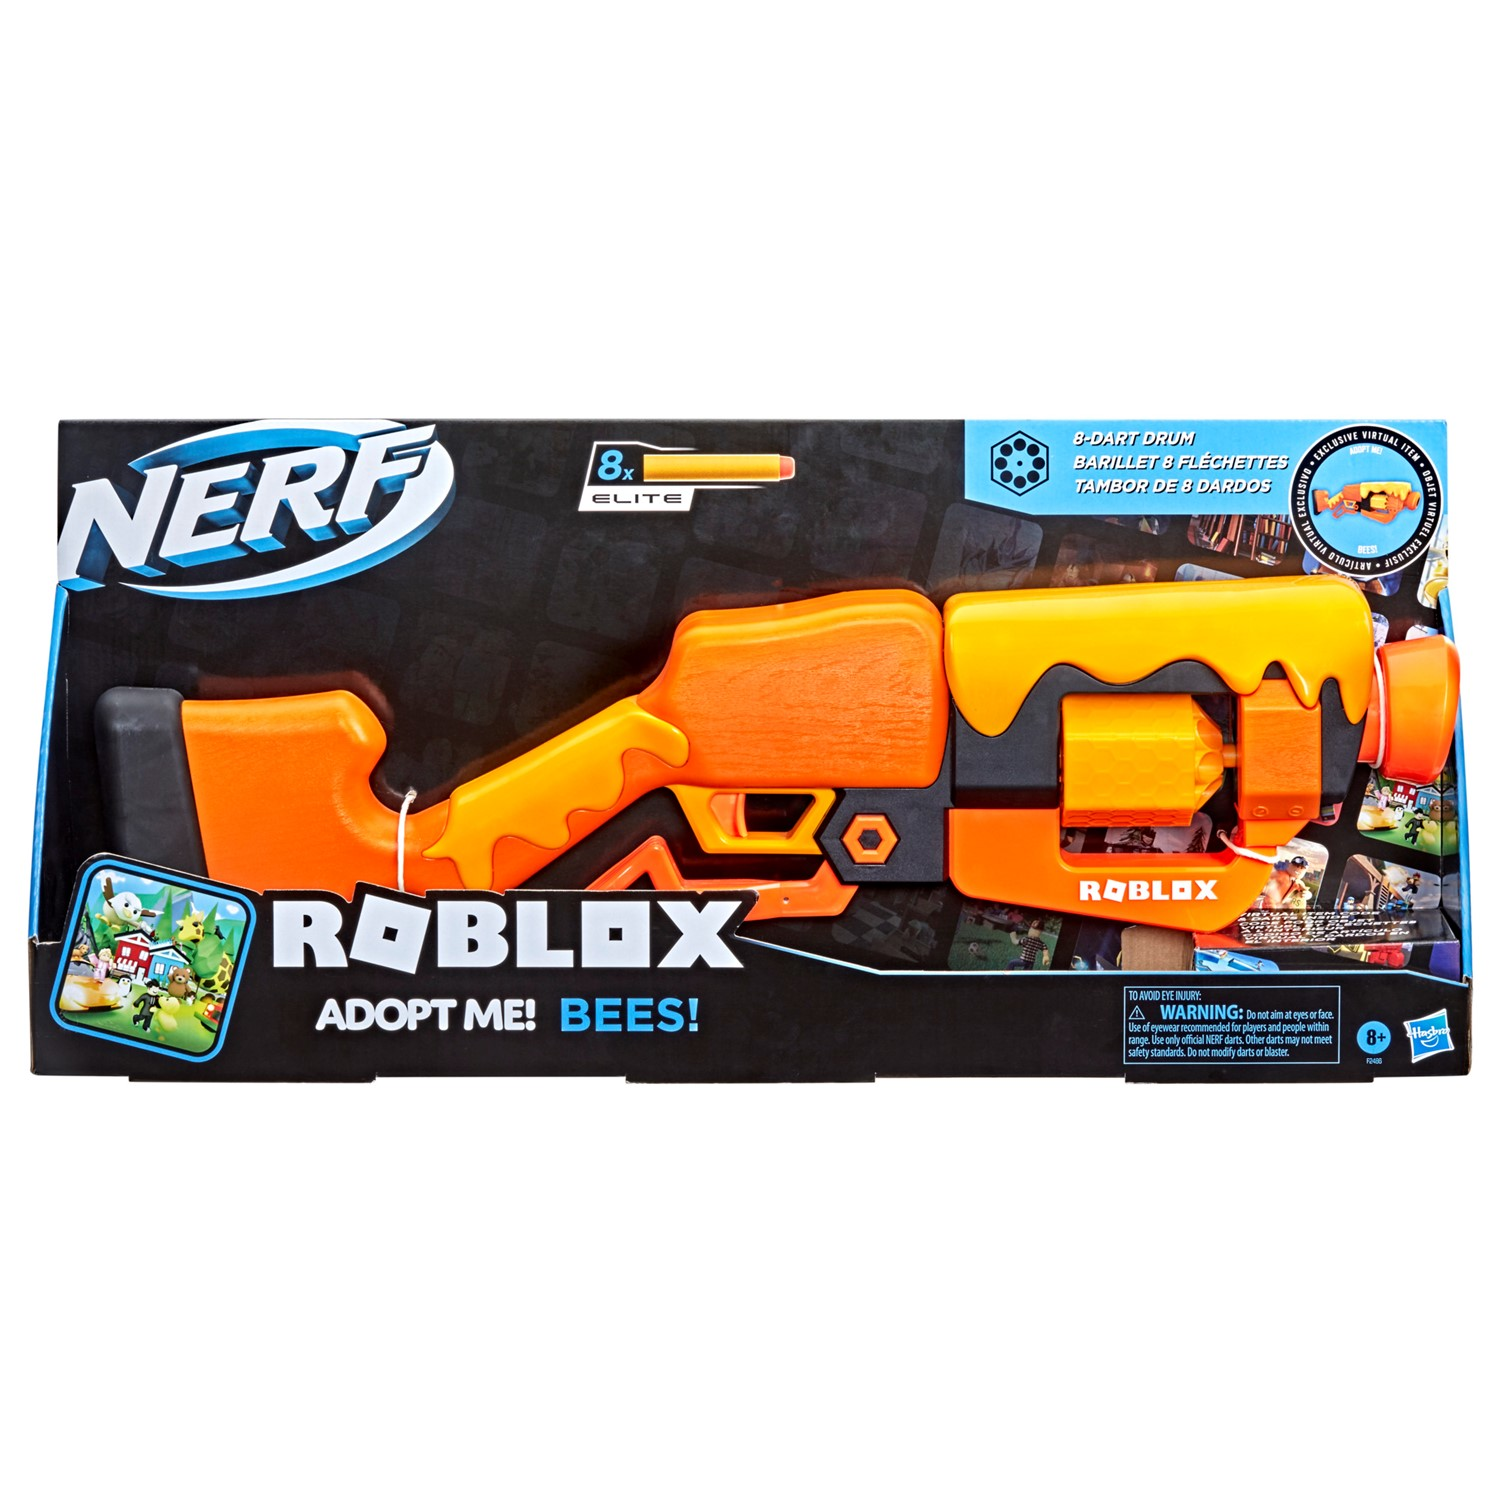 NERF Roblox Jailbreak: Armory, Includes 2 Hammer-Action Blasters, 10 Elite  Darts, Code to Unlock in-Game Virtual Item